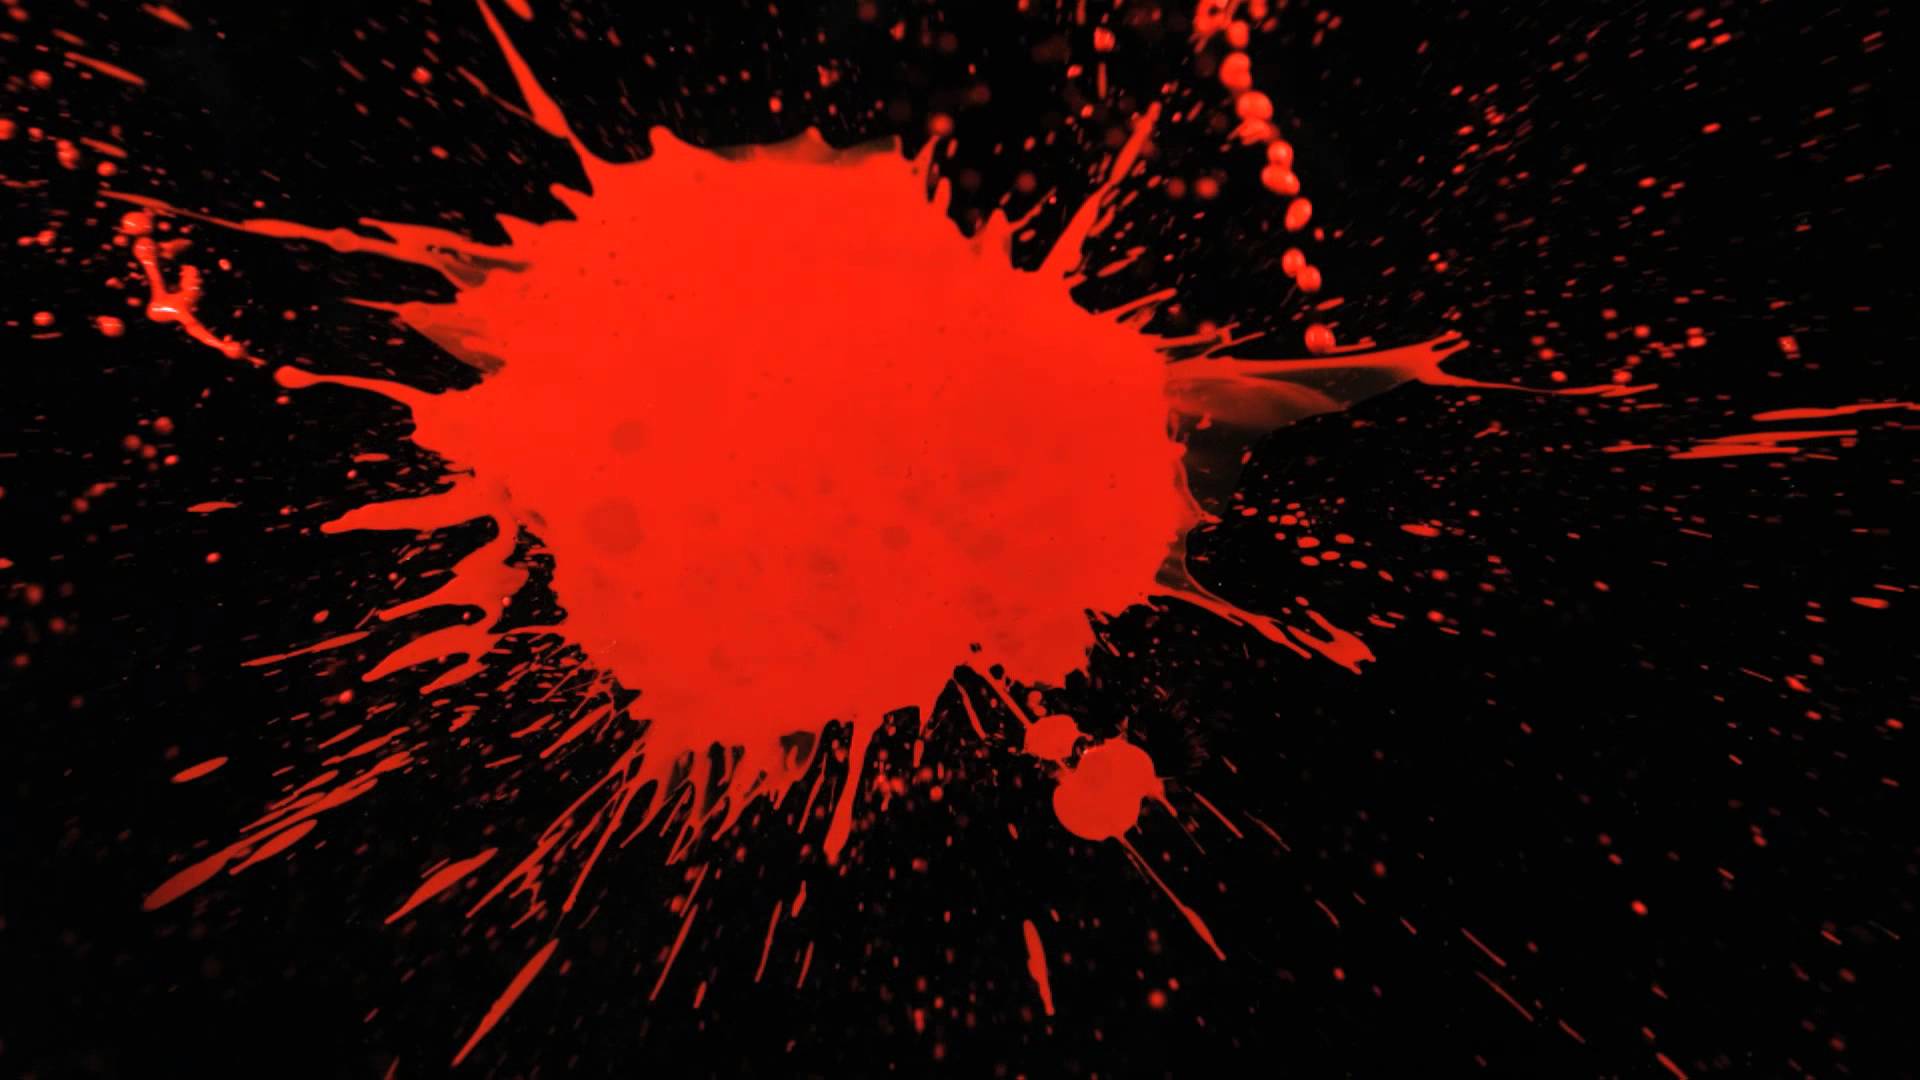 Slow Motion Paint Splatter with Red Paint Splattering a Black